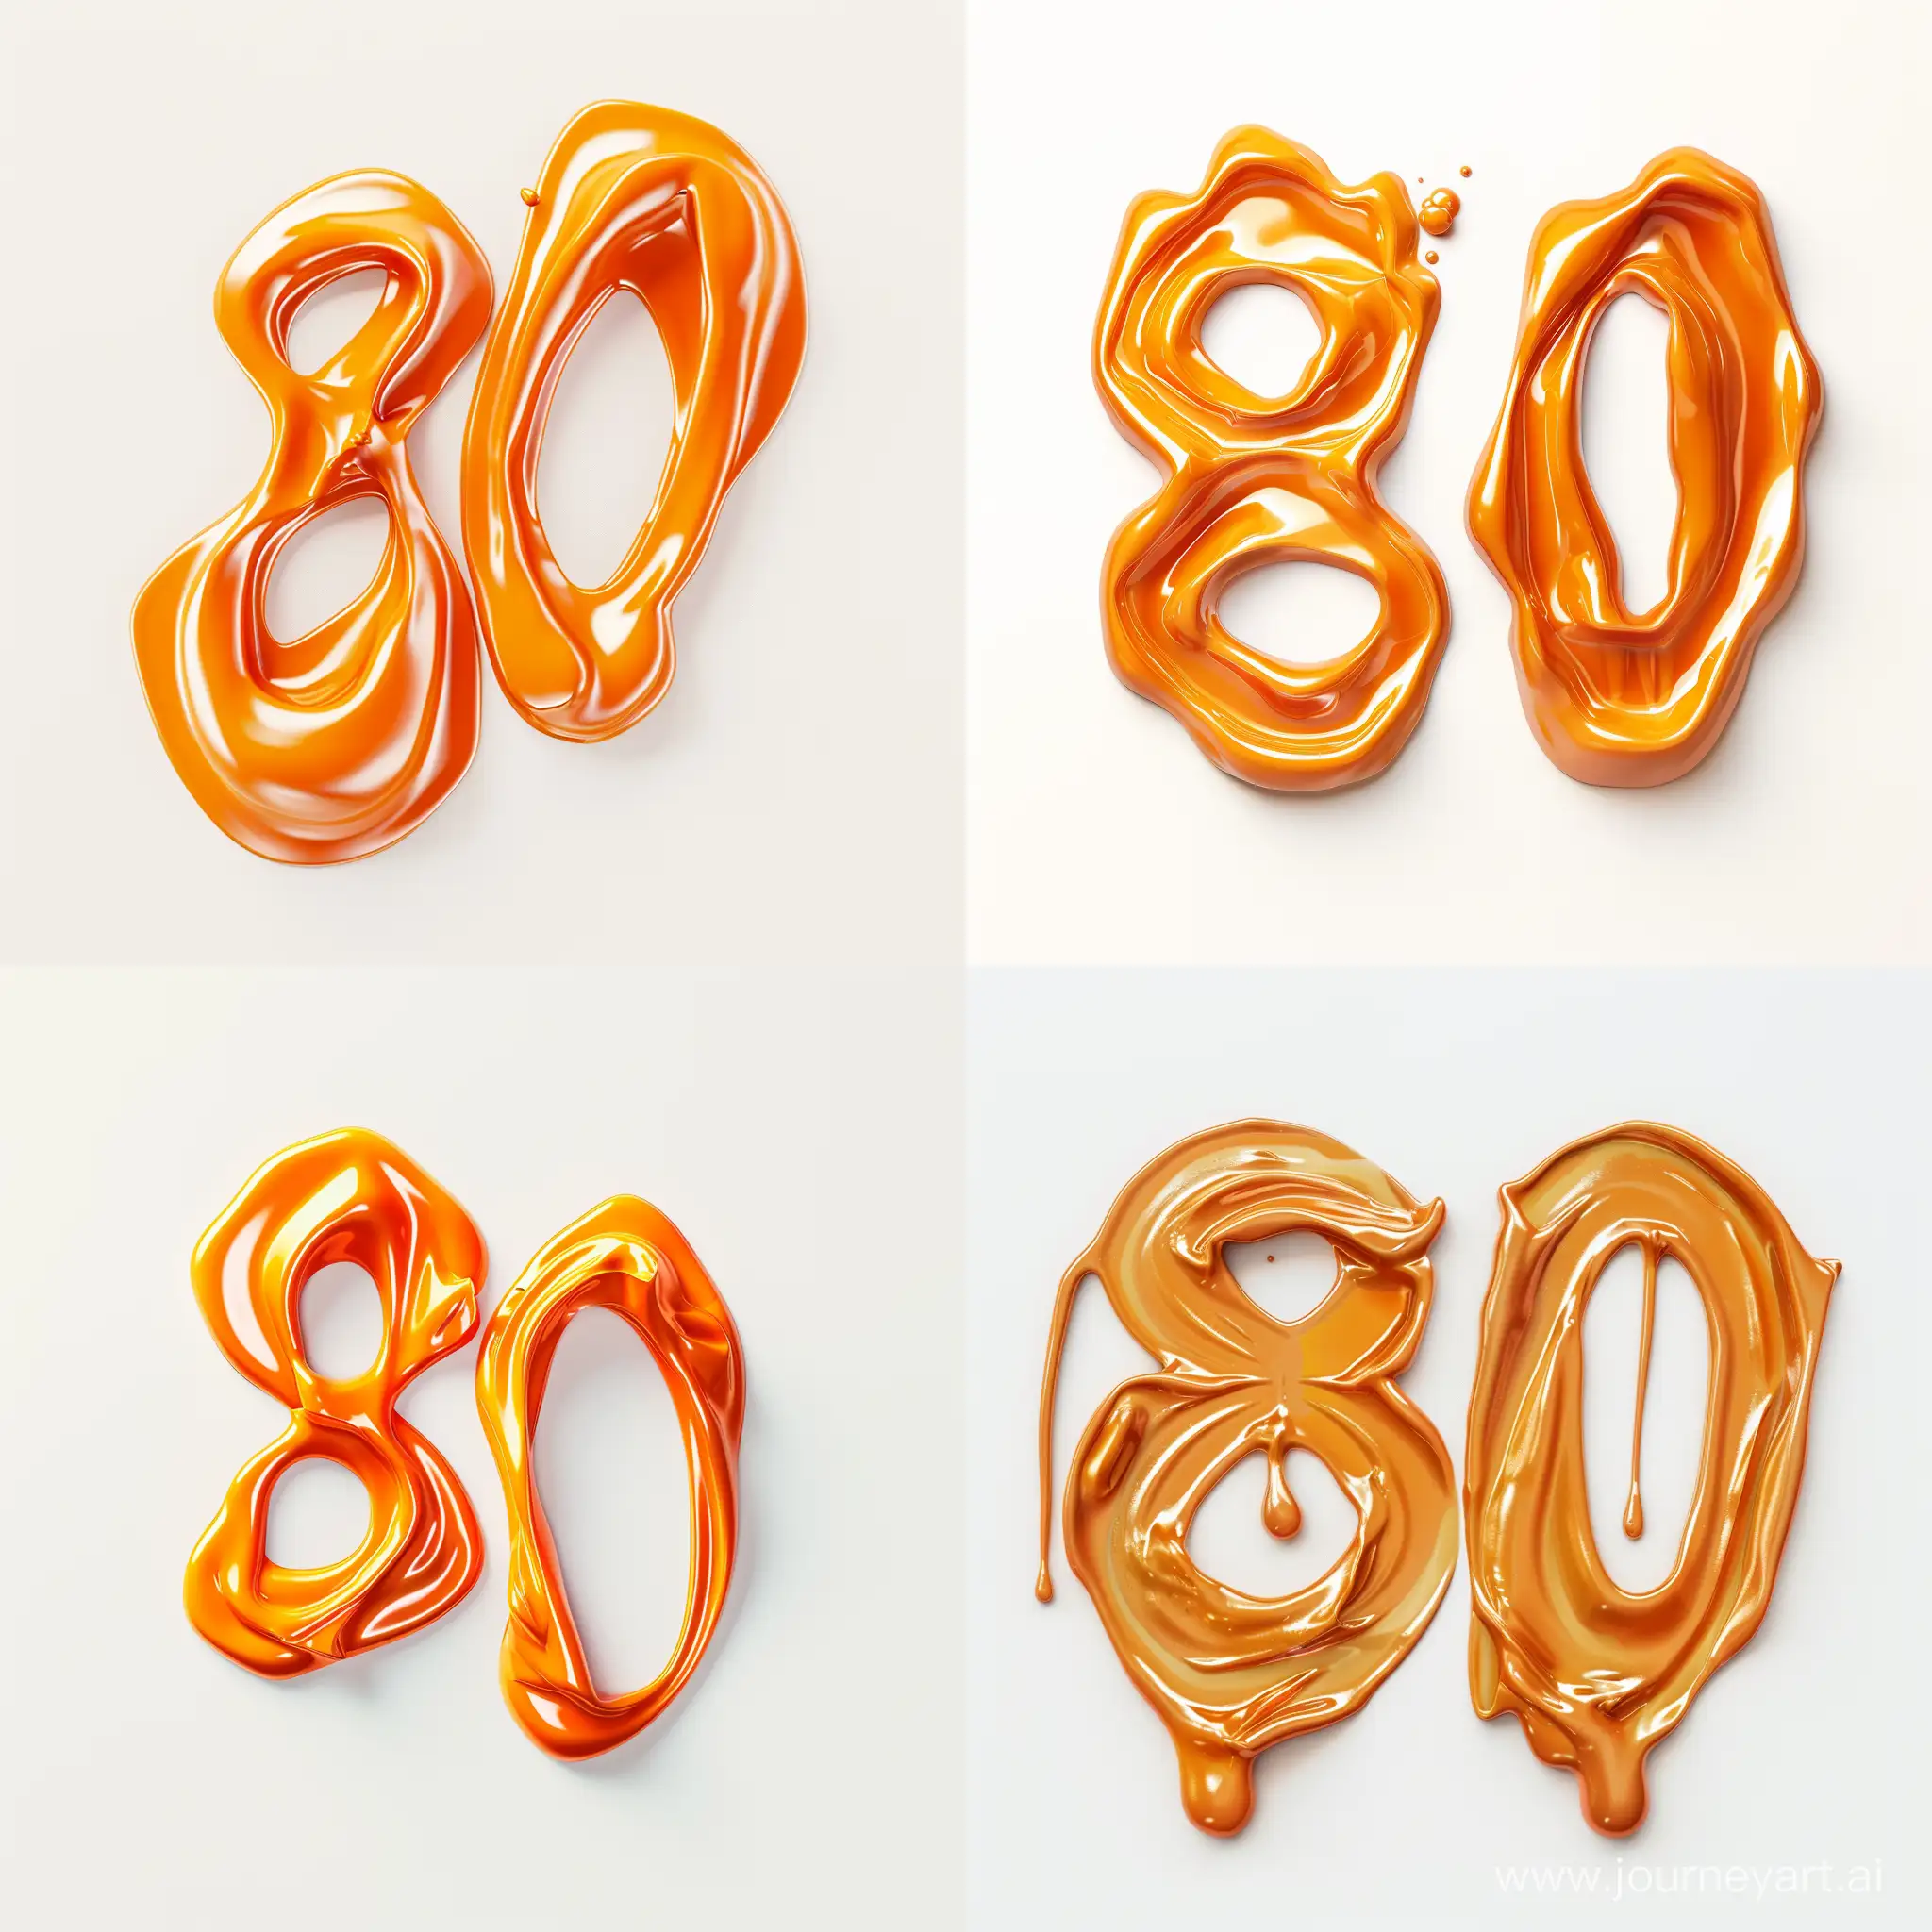 two abstract liquids of orange glossy paint forming the number 80 on white background, photo realistic, high resolution, unreal quality